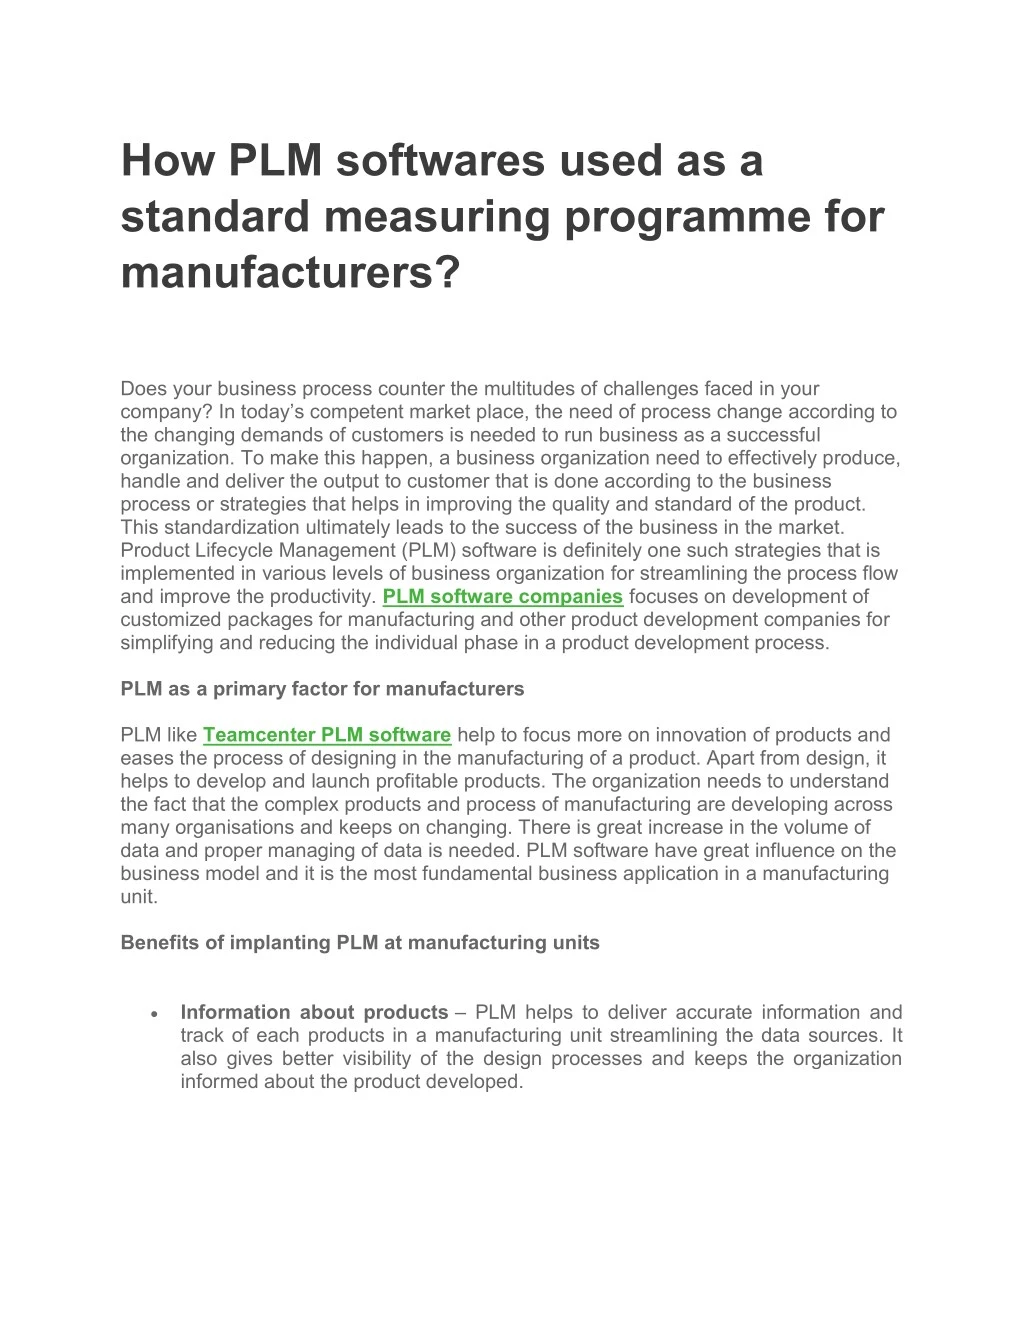 how plm softwares used as a standard measuring